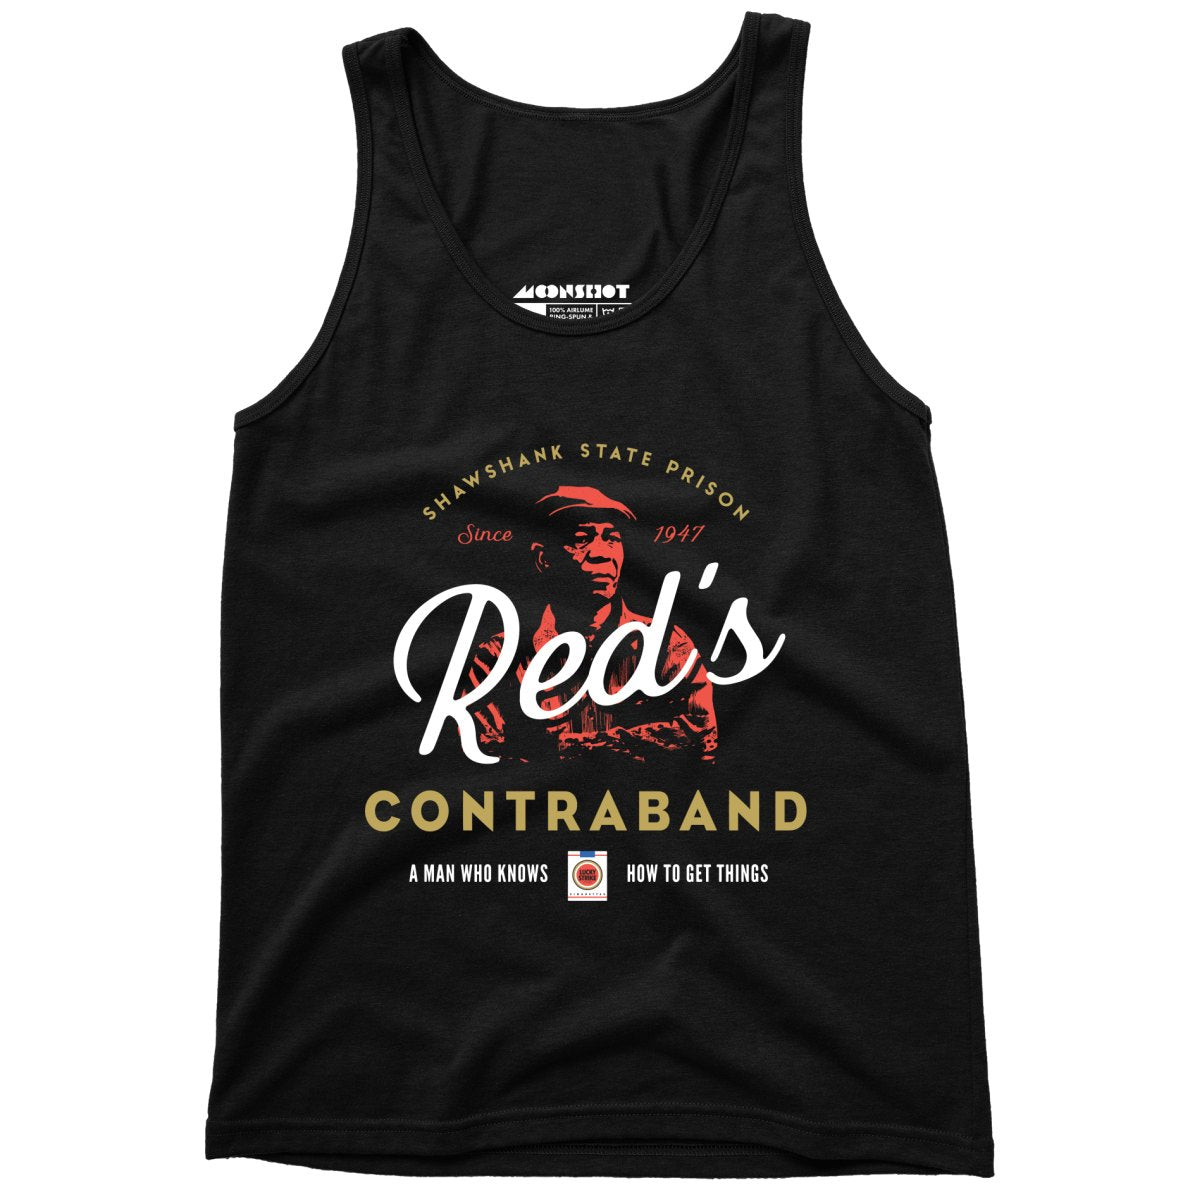 Red's Contraband - Unisex Tank Top